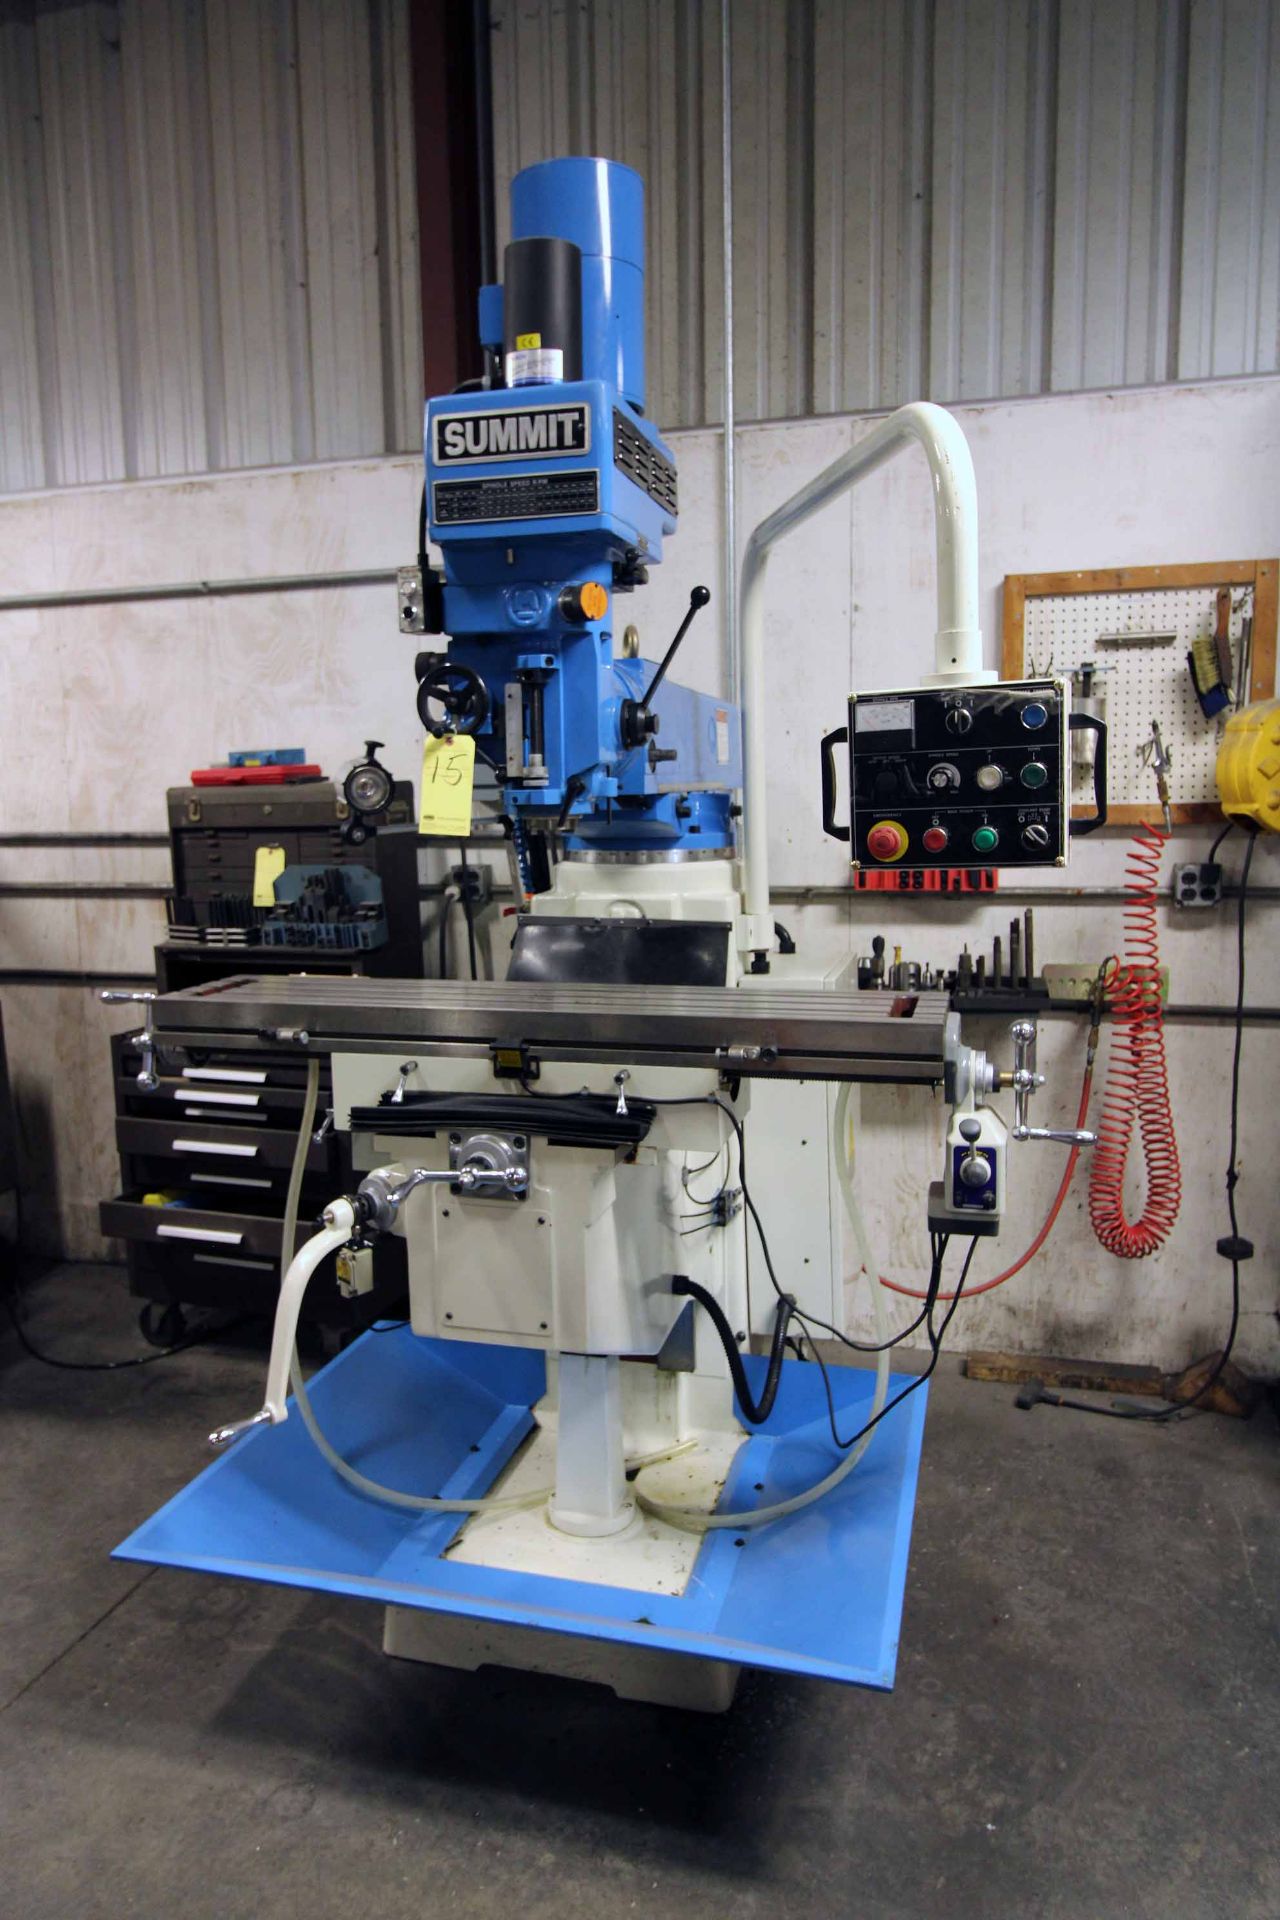 VERTICAL TURRET MILL, SUMMIT MDL. EVS-550B, new 2018, 11 x 52” table, hardened & ground ways,